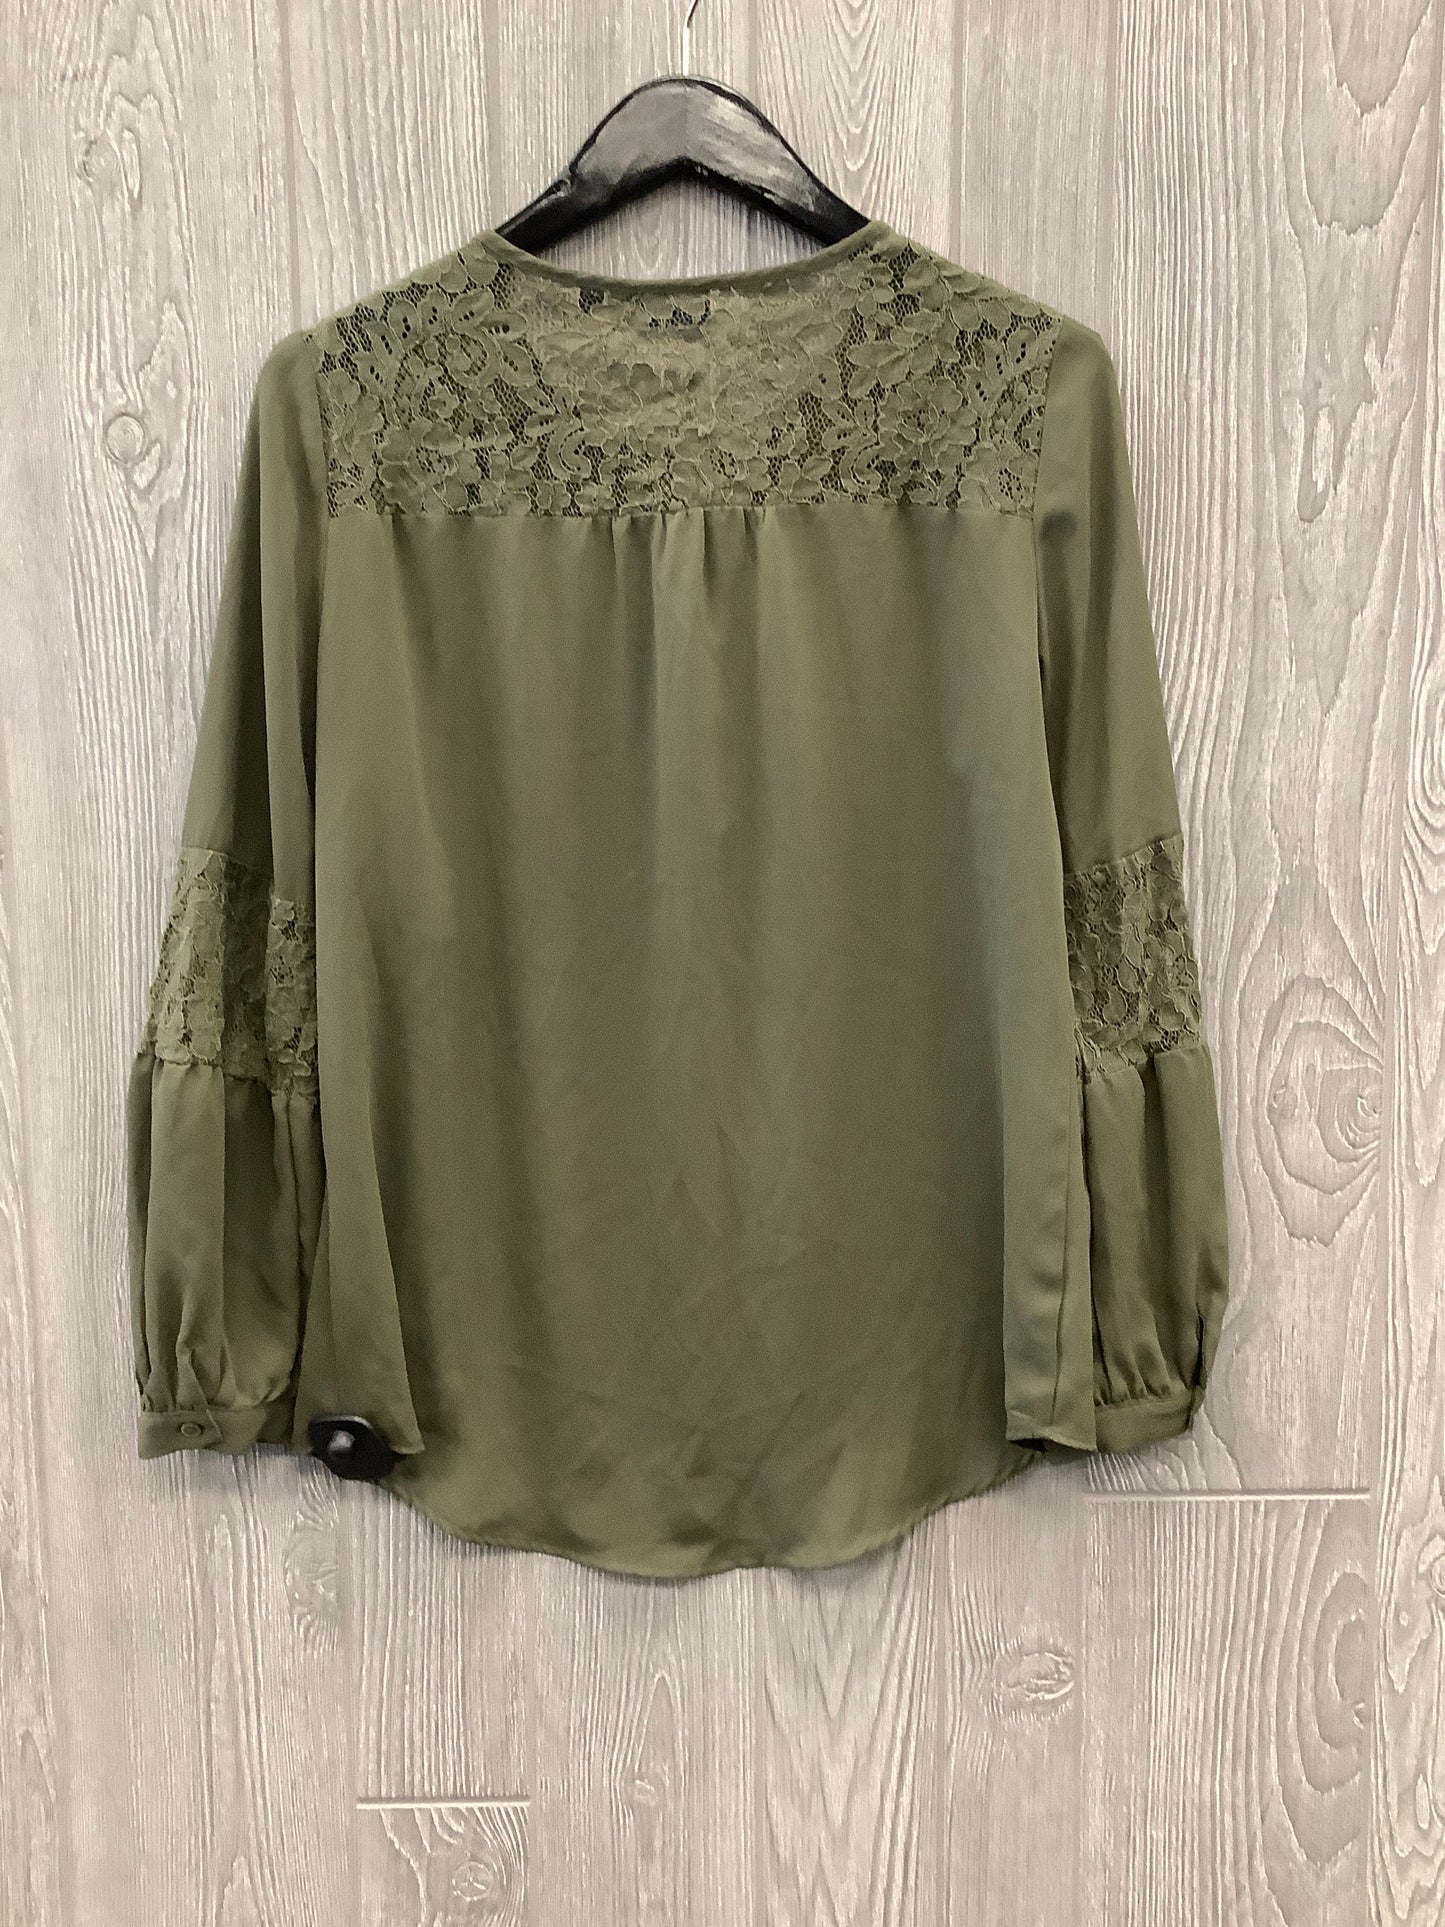 Blouse Long Sleeve By Apt 9  Size: S